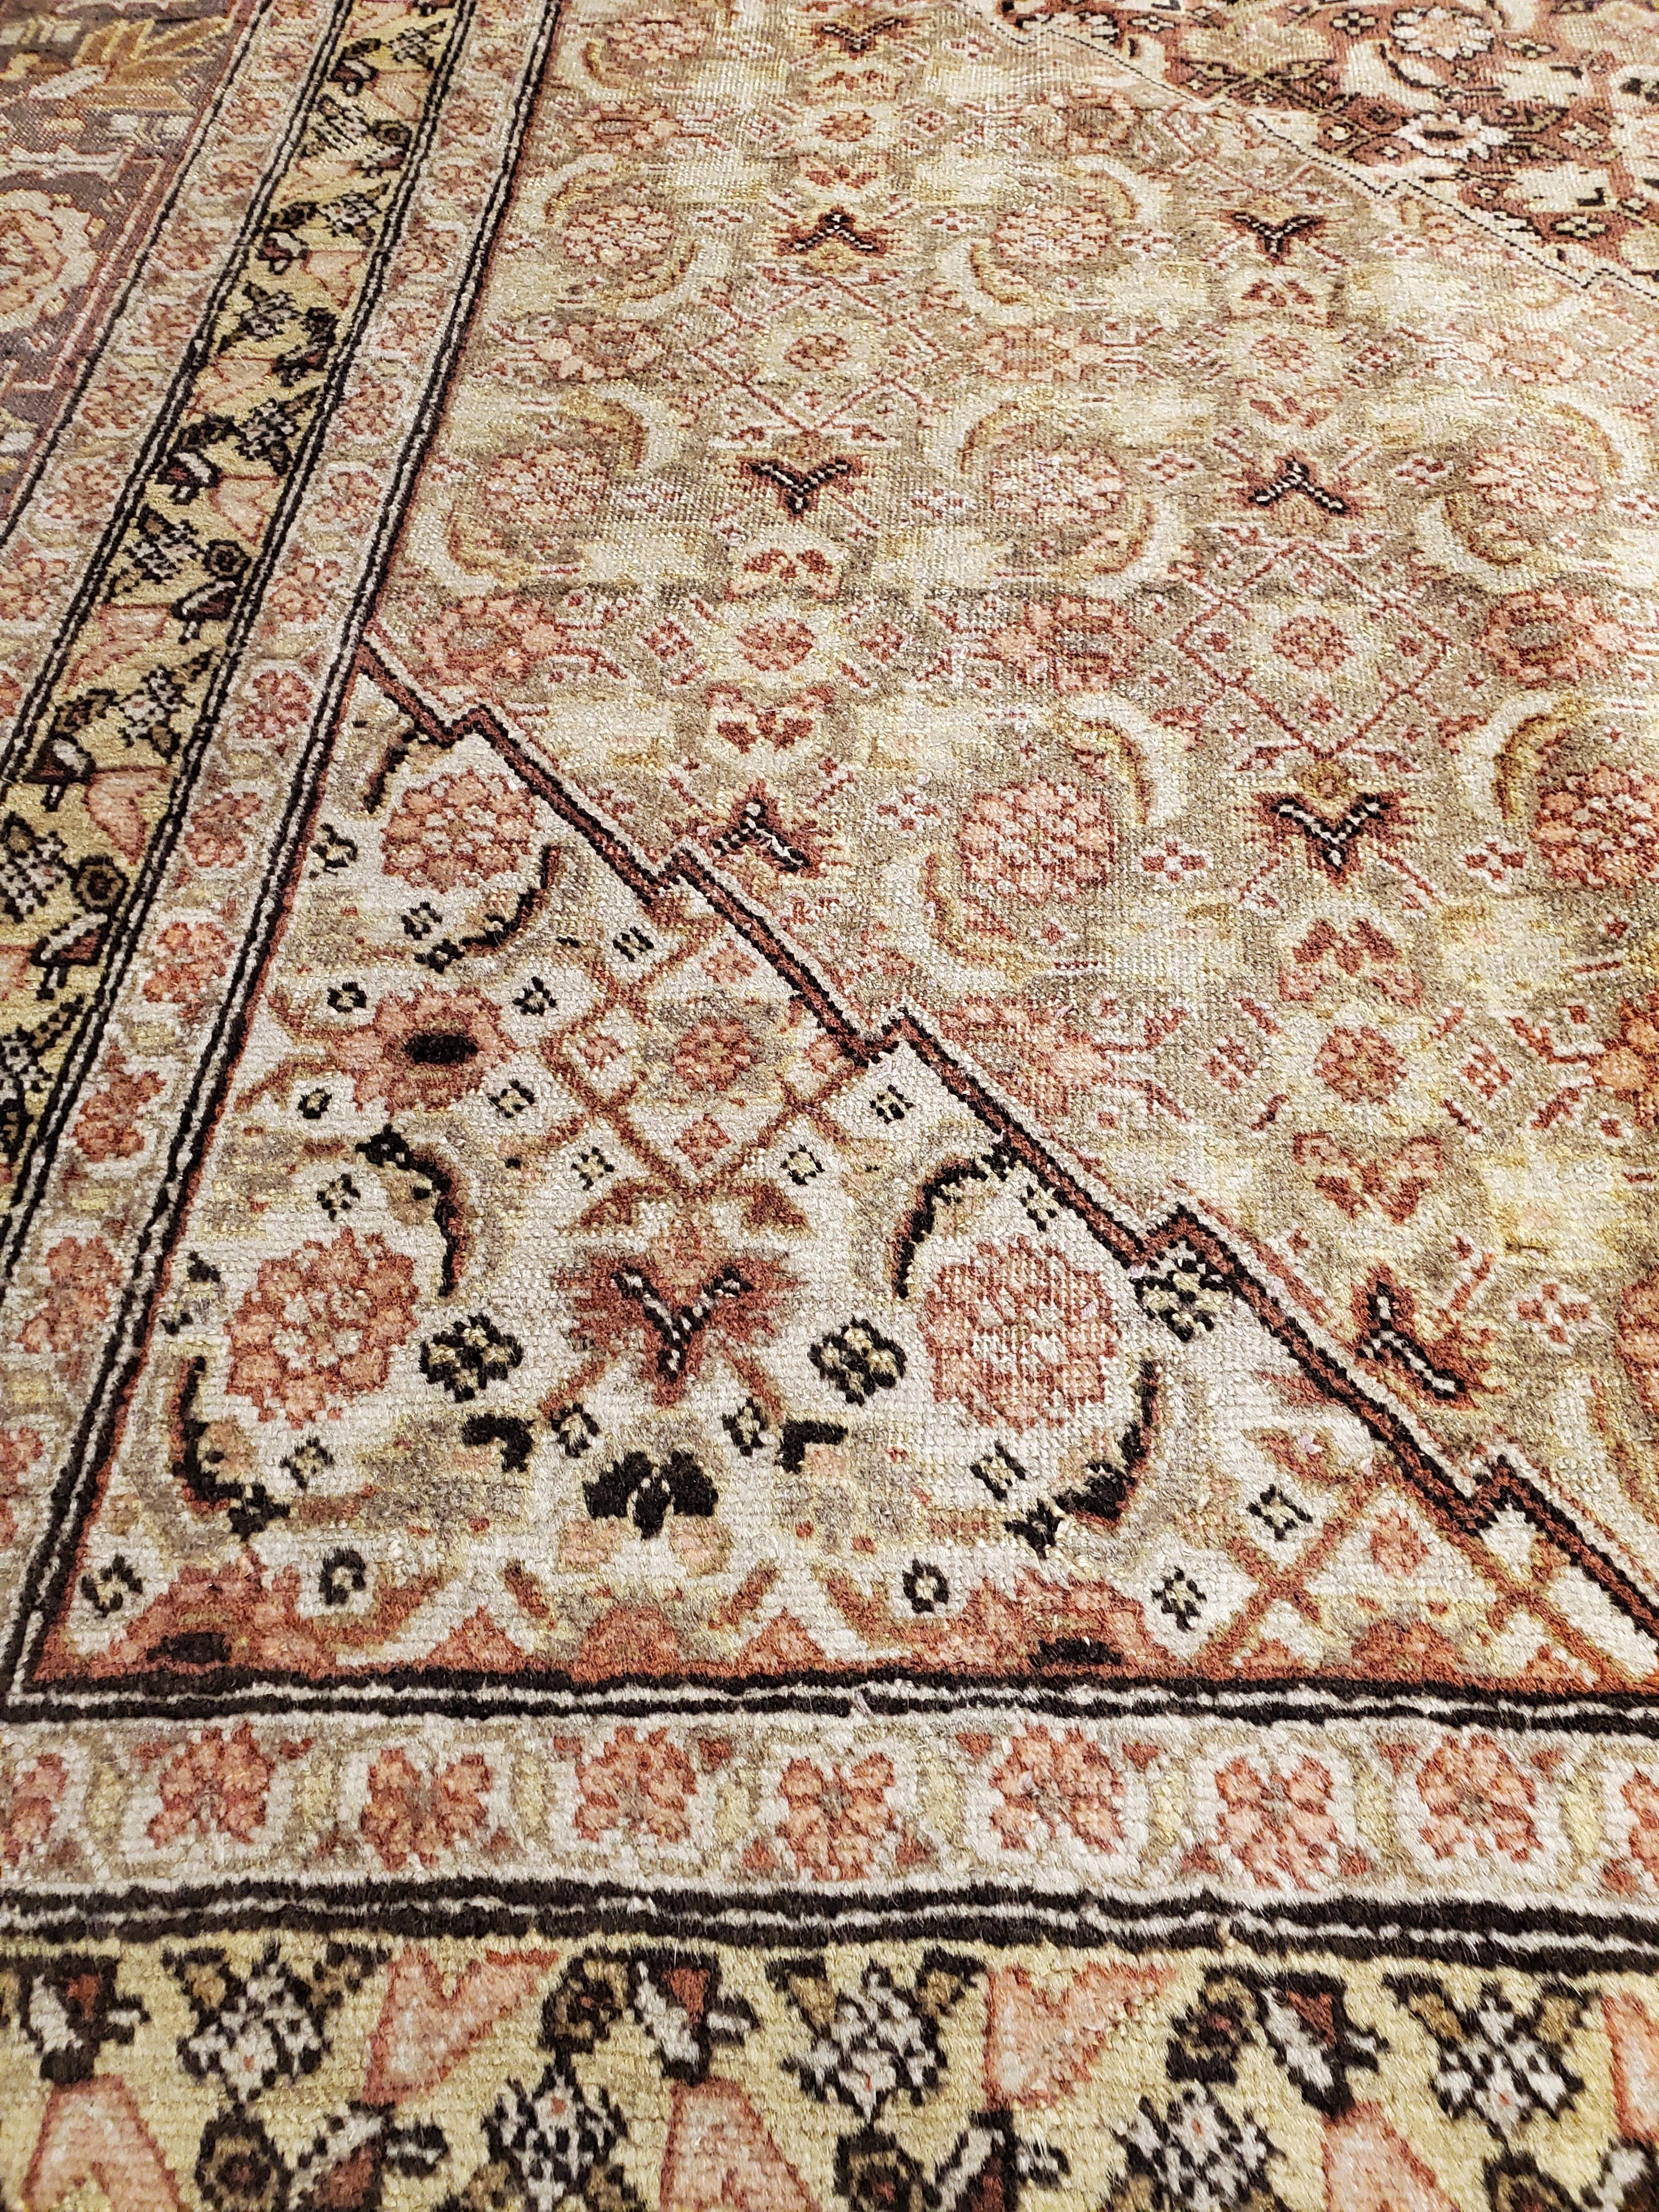 19th Century Antique Tabriz Carpet, Handmade Persian Rug in Masculine Gold, Brown and Taupe For Sale